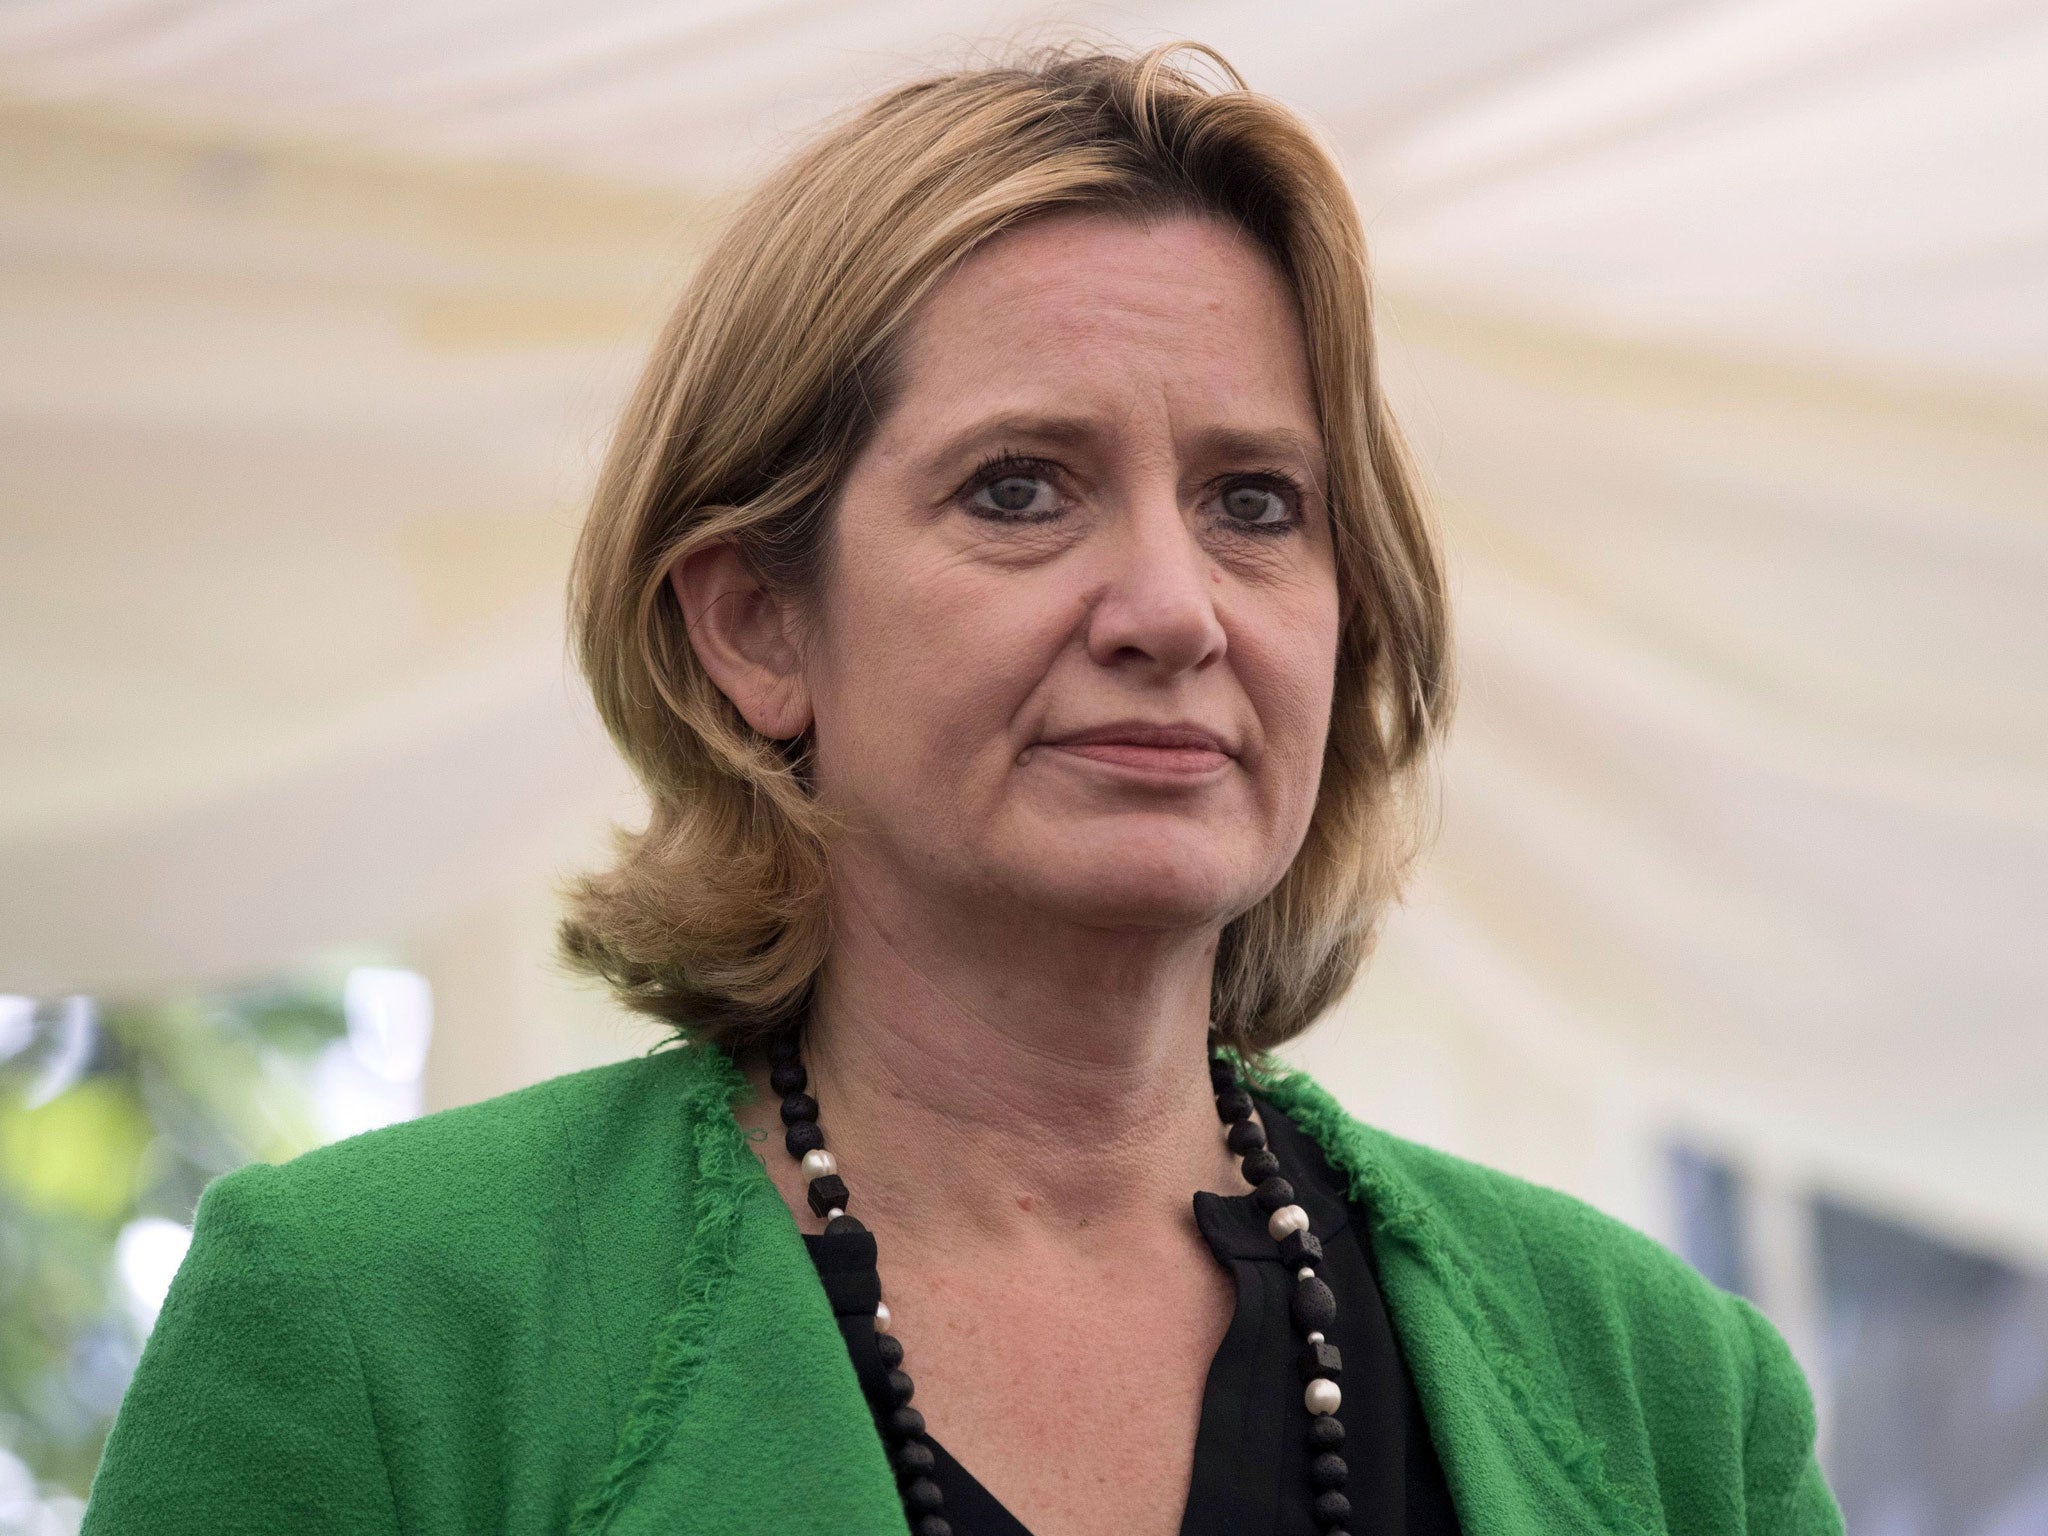 Amber Rudd, the Home Secretary, is visiting France on Tuesday